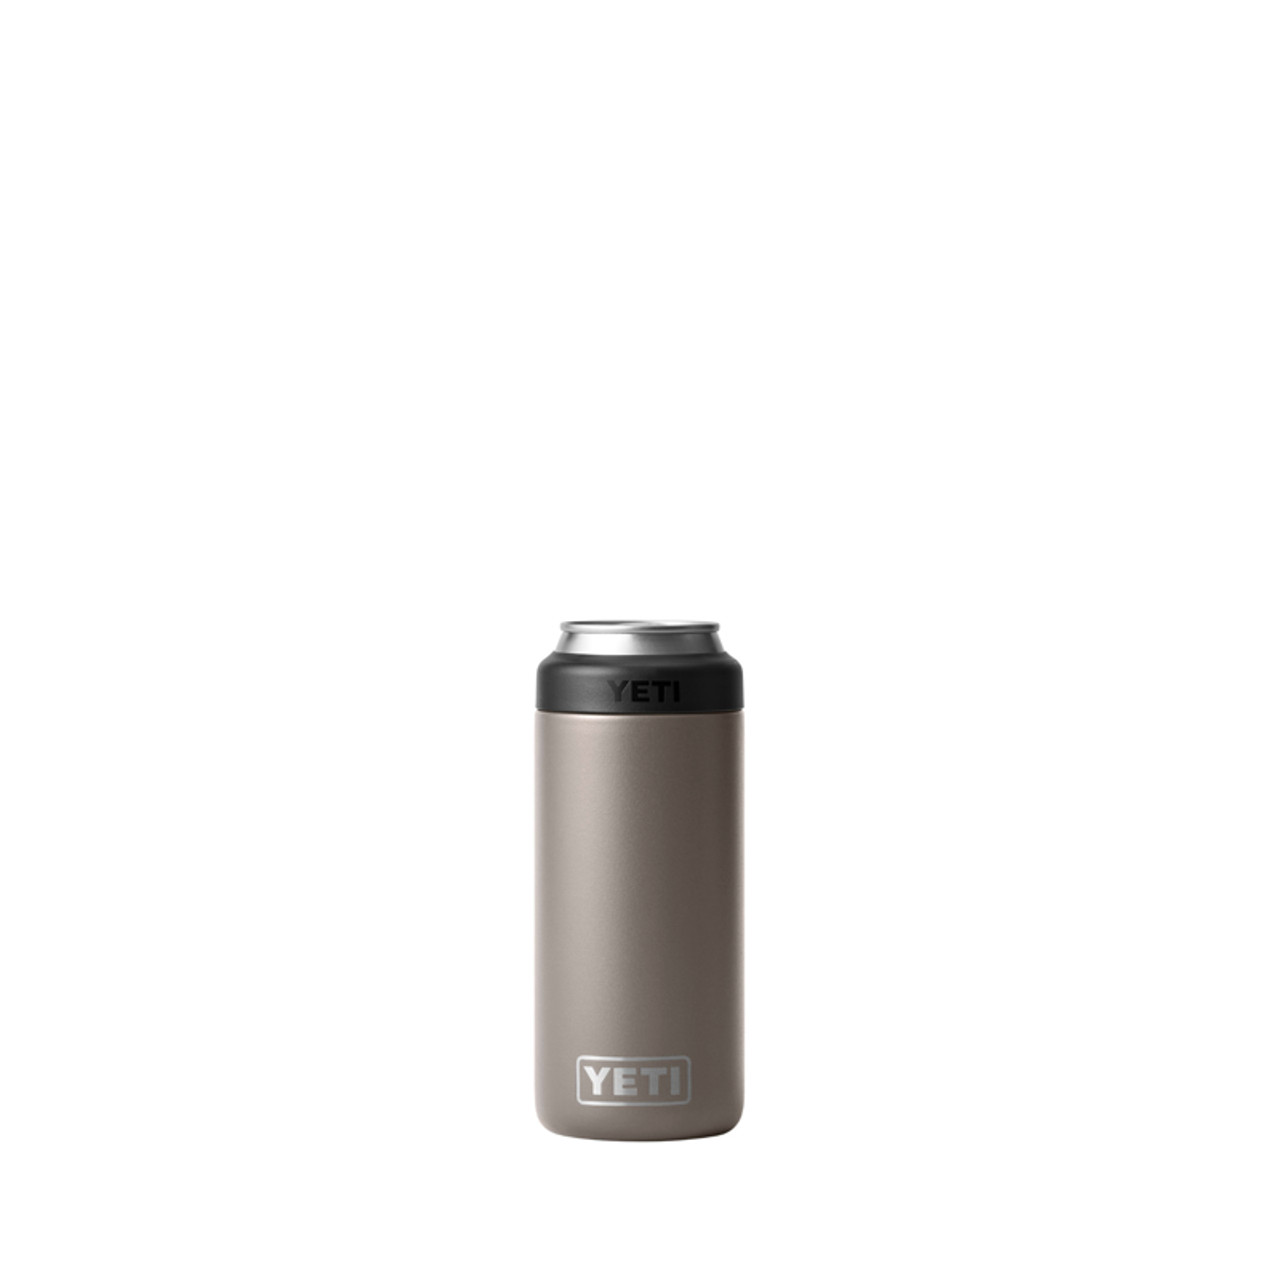 Yeti Rambler Colster 12 Oz. Silver Stainless Steel Insulated Drink